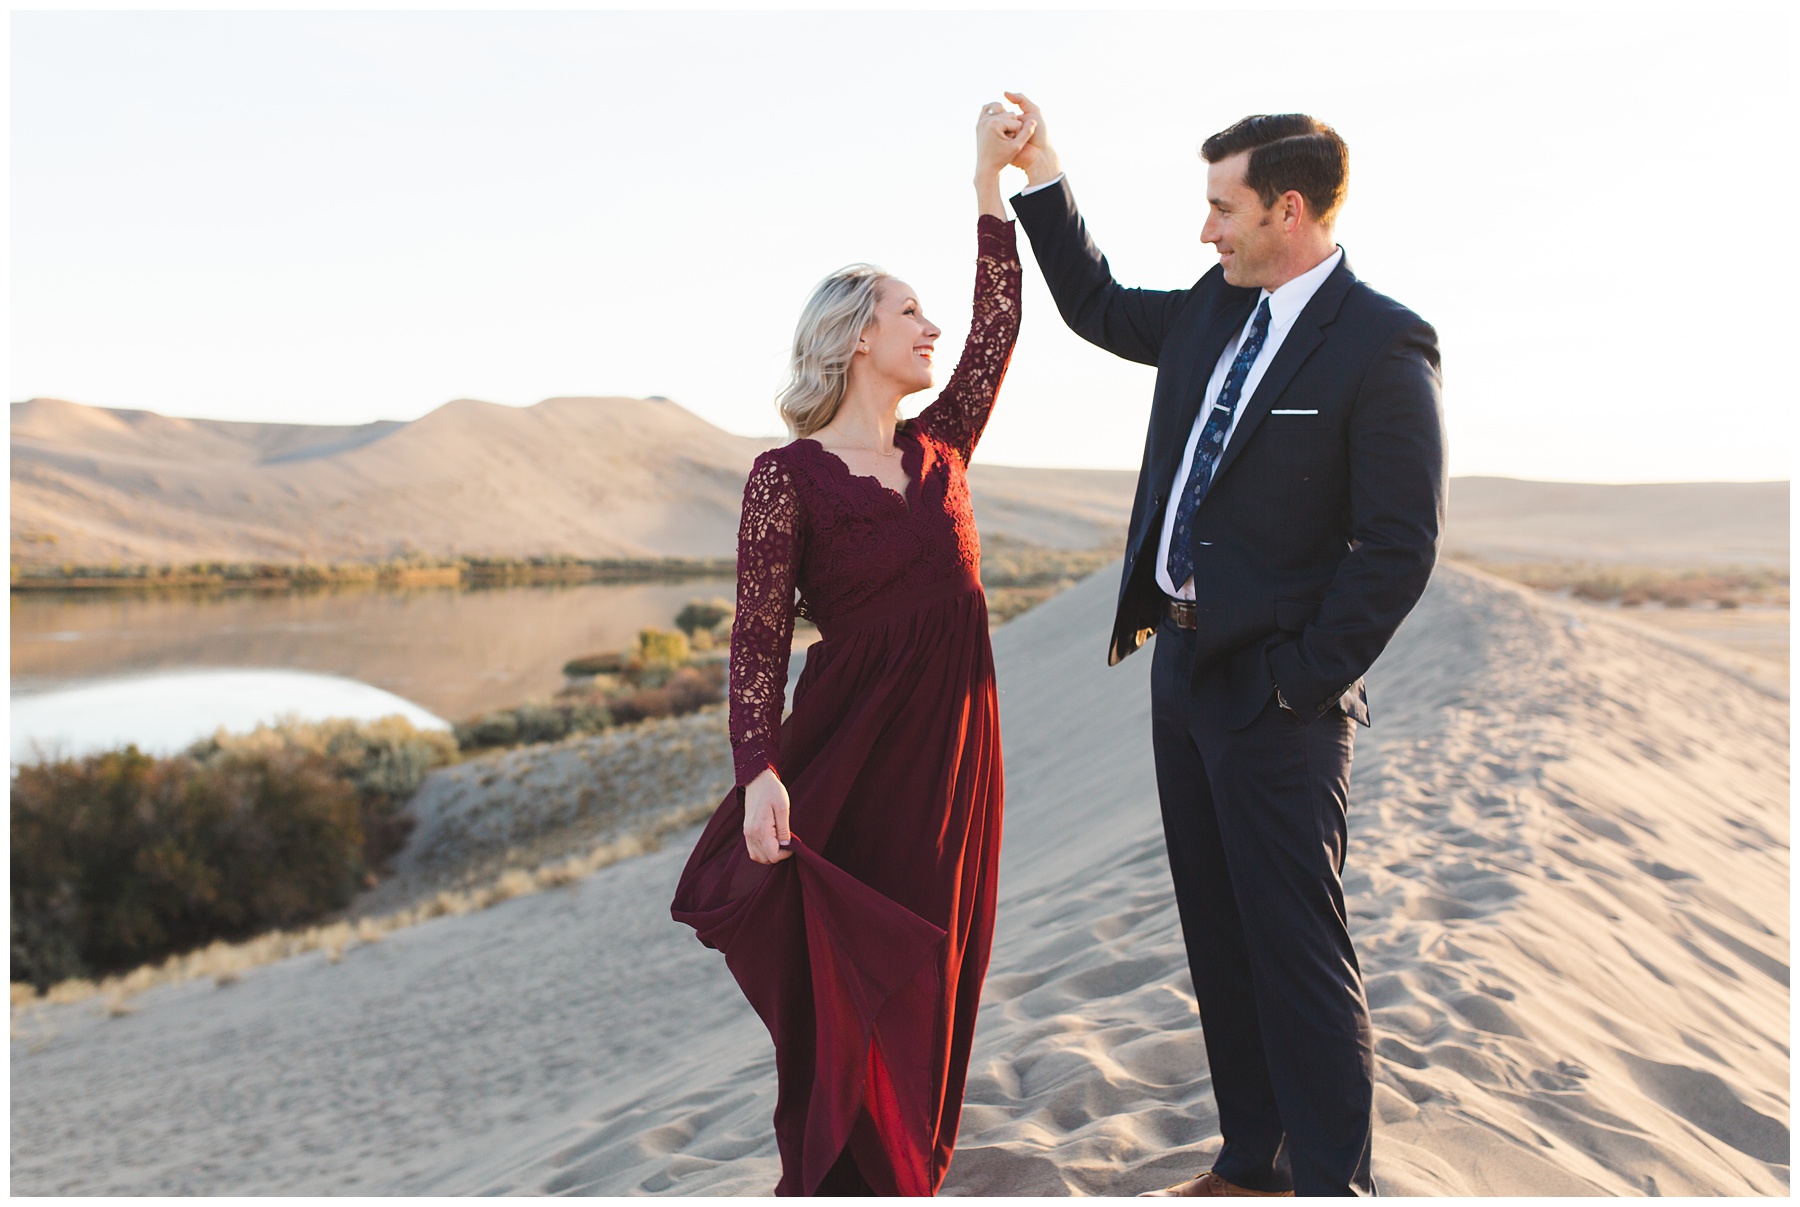 man in suit, woman in red dress dancing on the sand dunes. family photos at the dunes